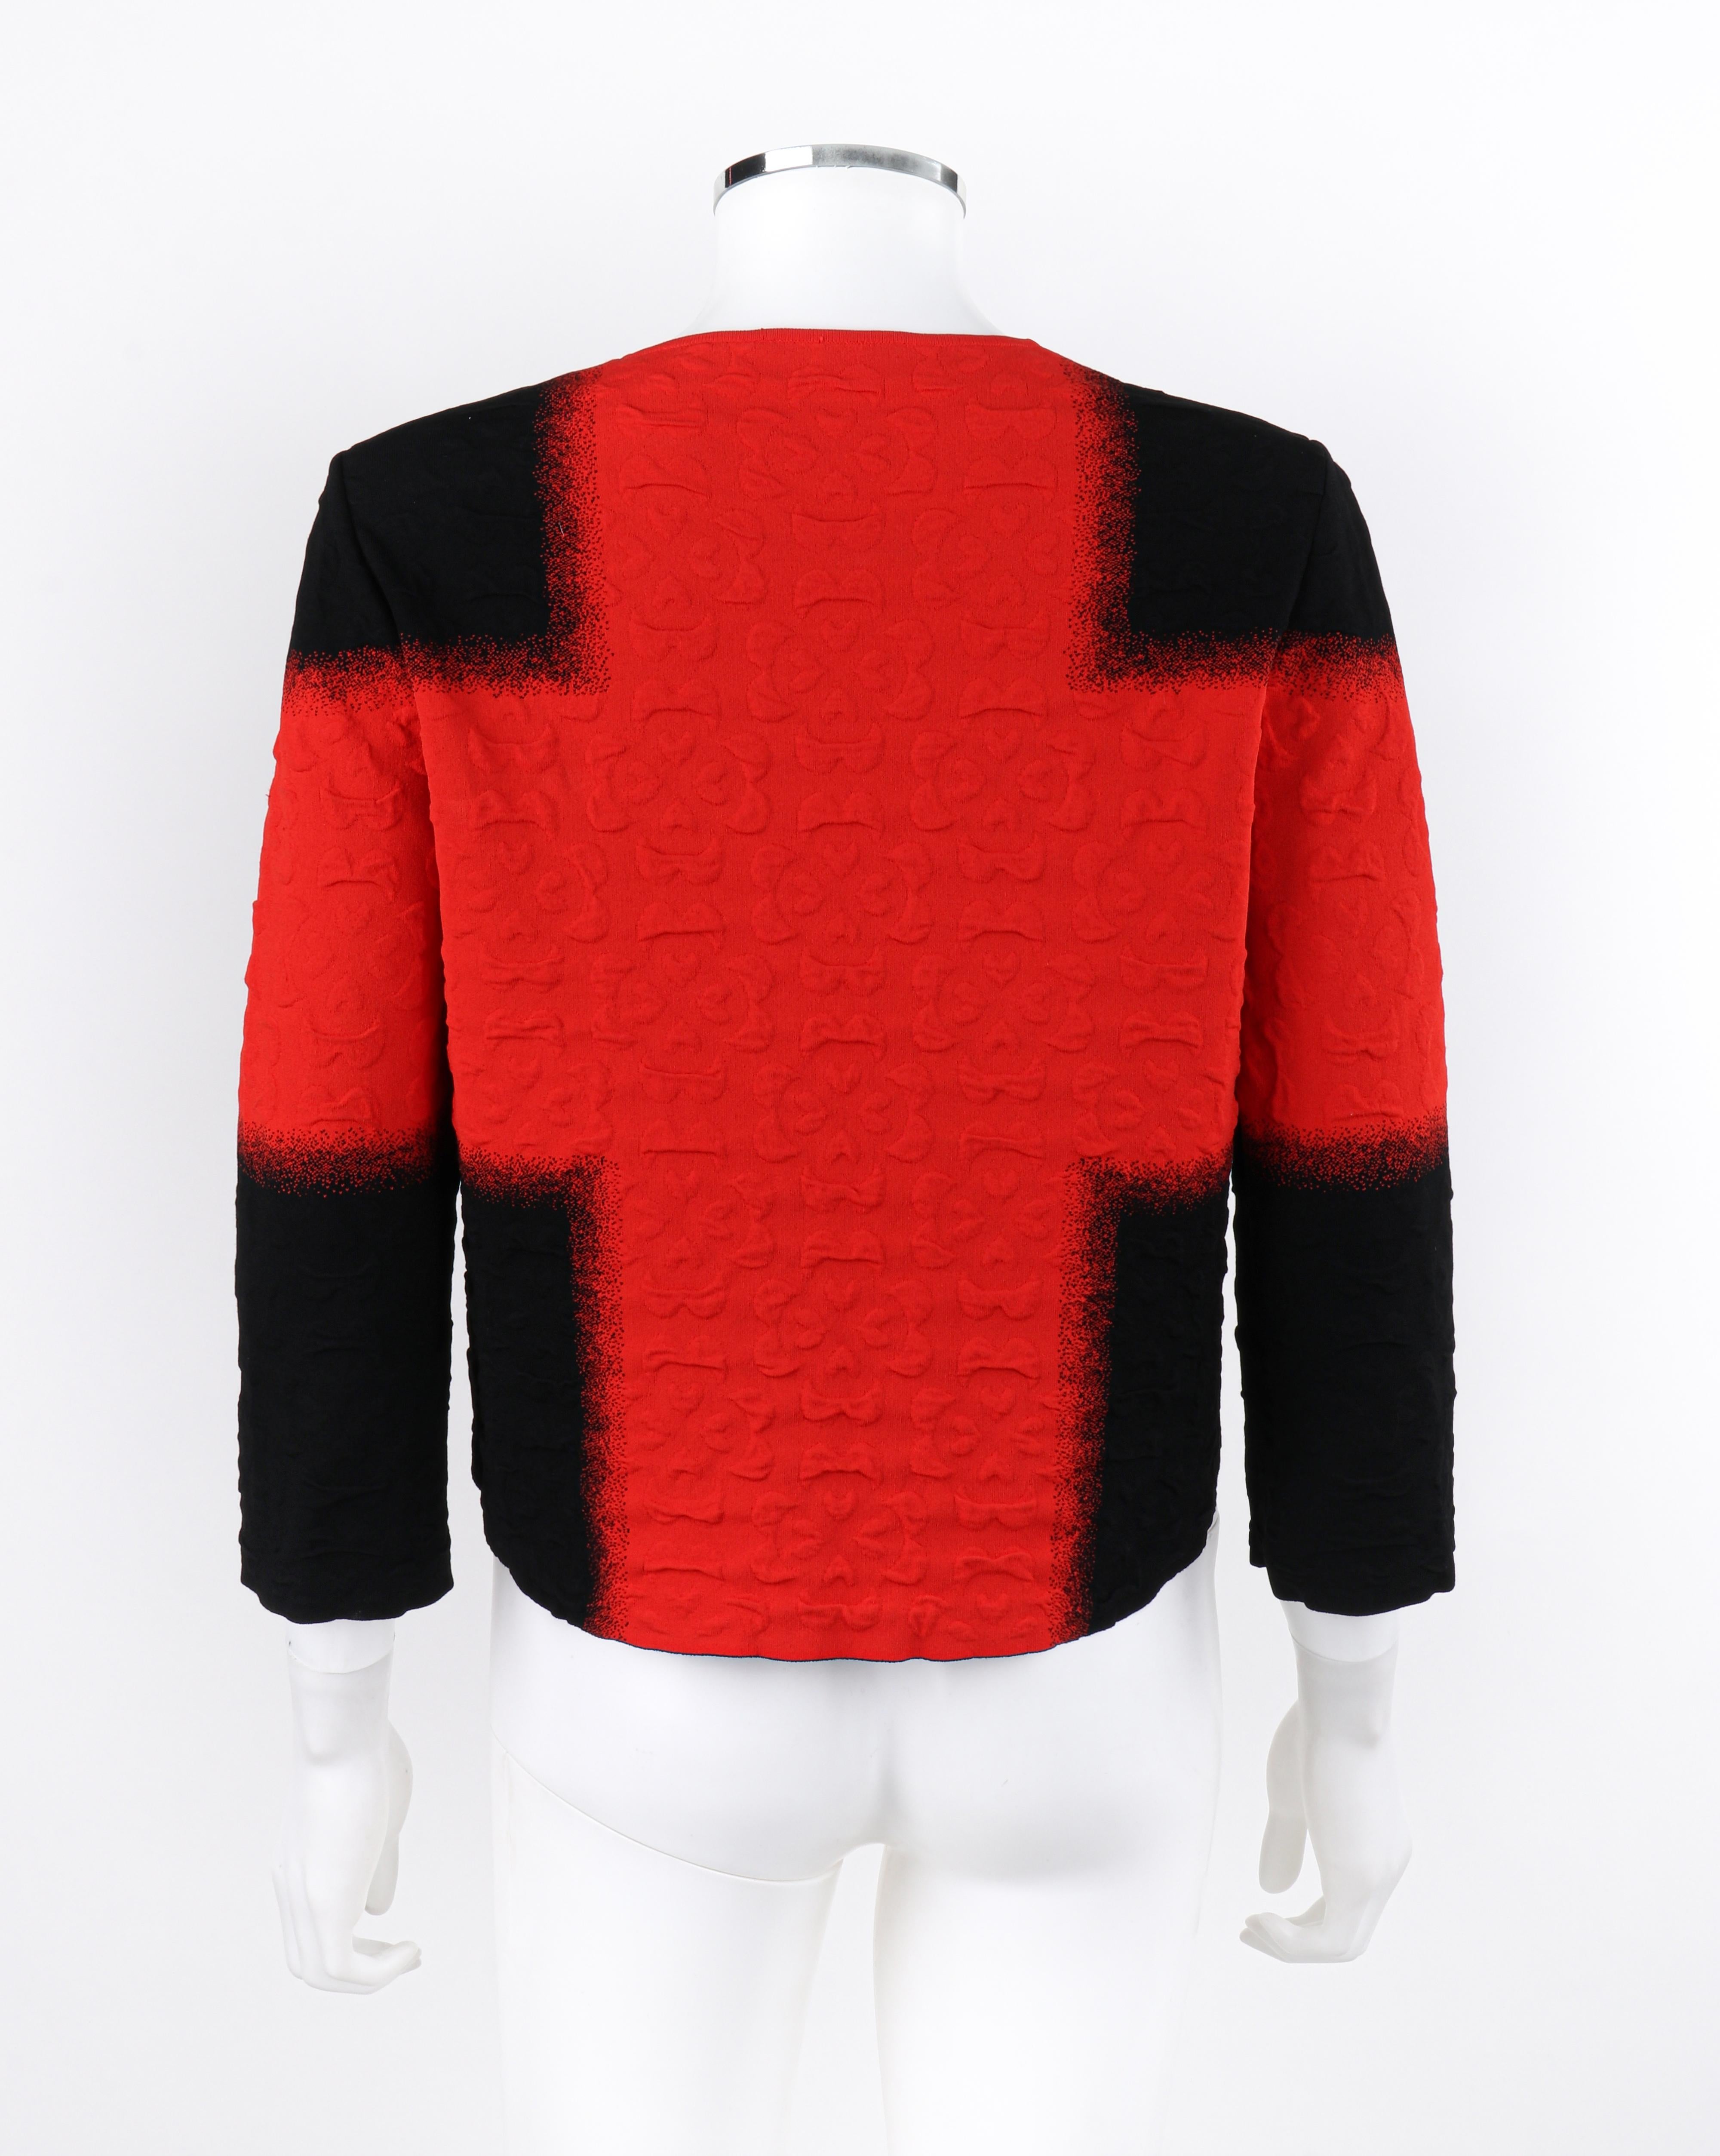 ALEXANDER McQUEEN Resort 2015 Black Red Embossed Stretch Knit Colorblock Top  For Sale 3